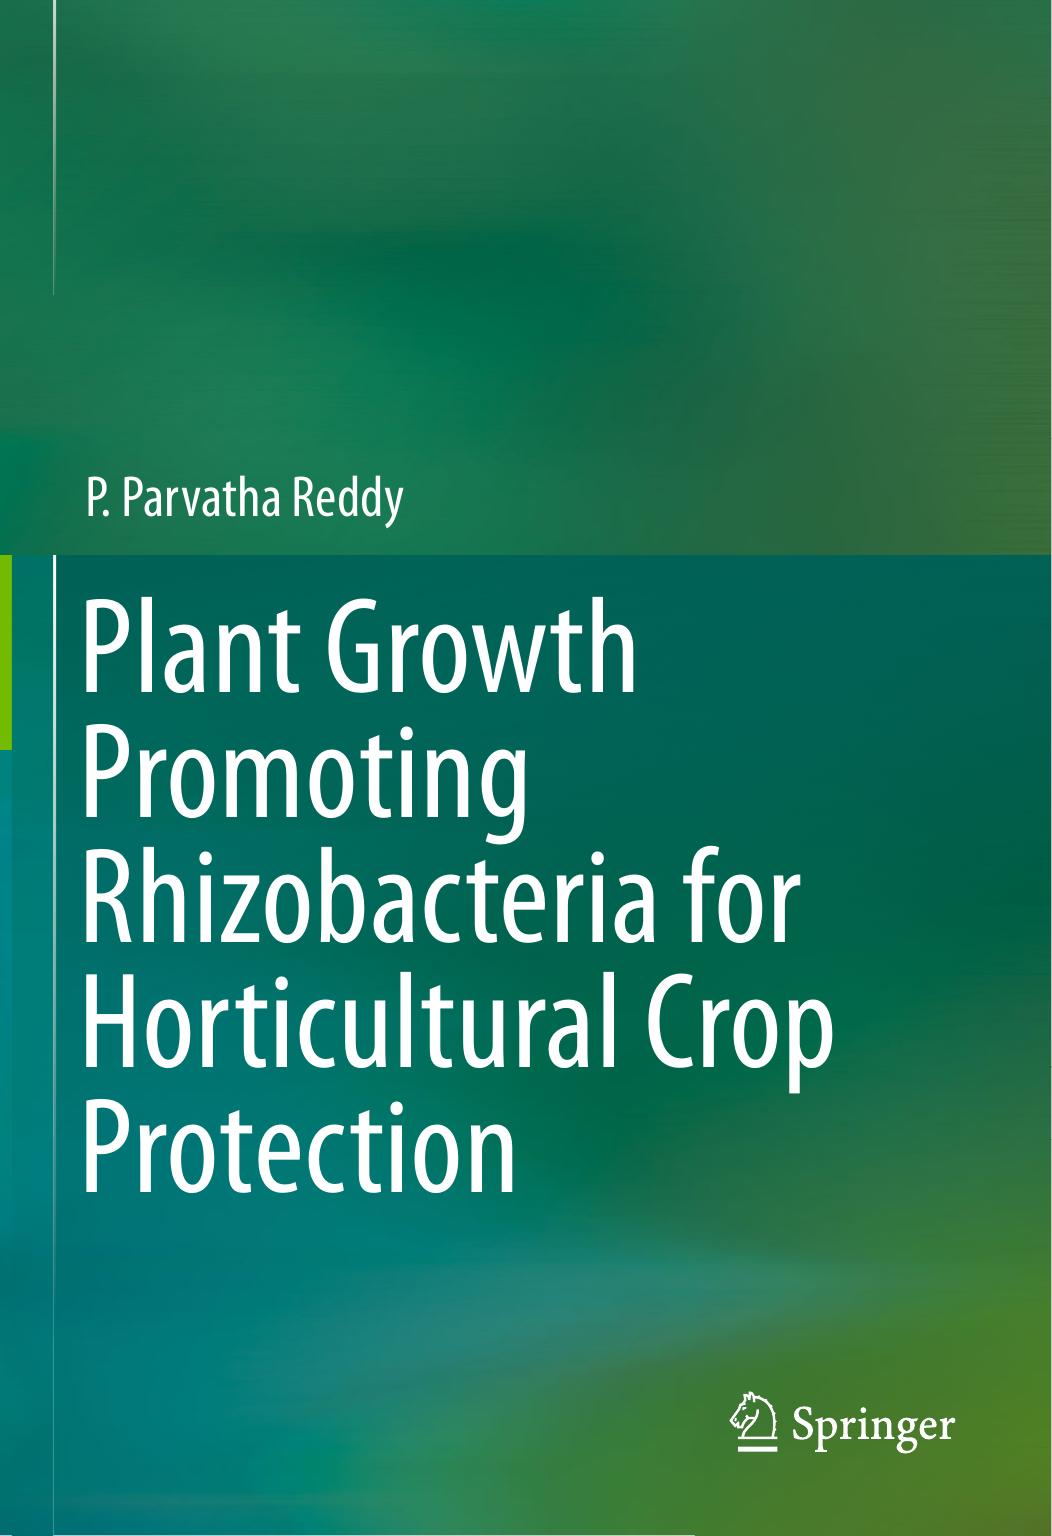 Plant Growth Promoting Rhizobacteria for Horticultural Crop Protection 2014